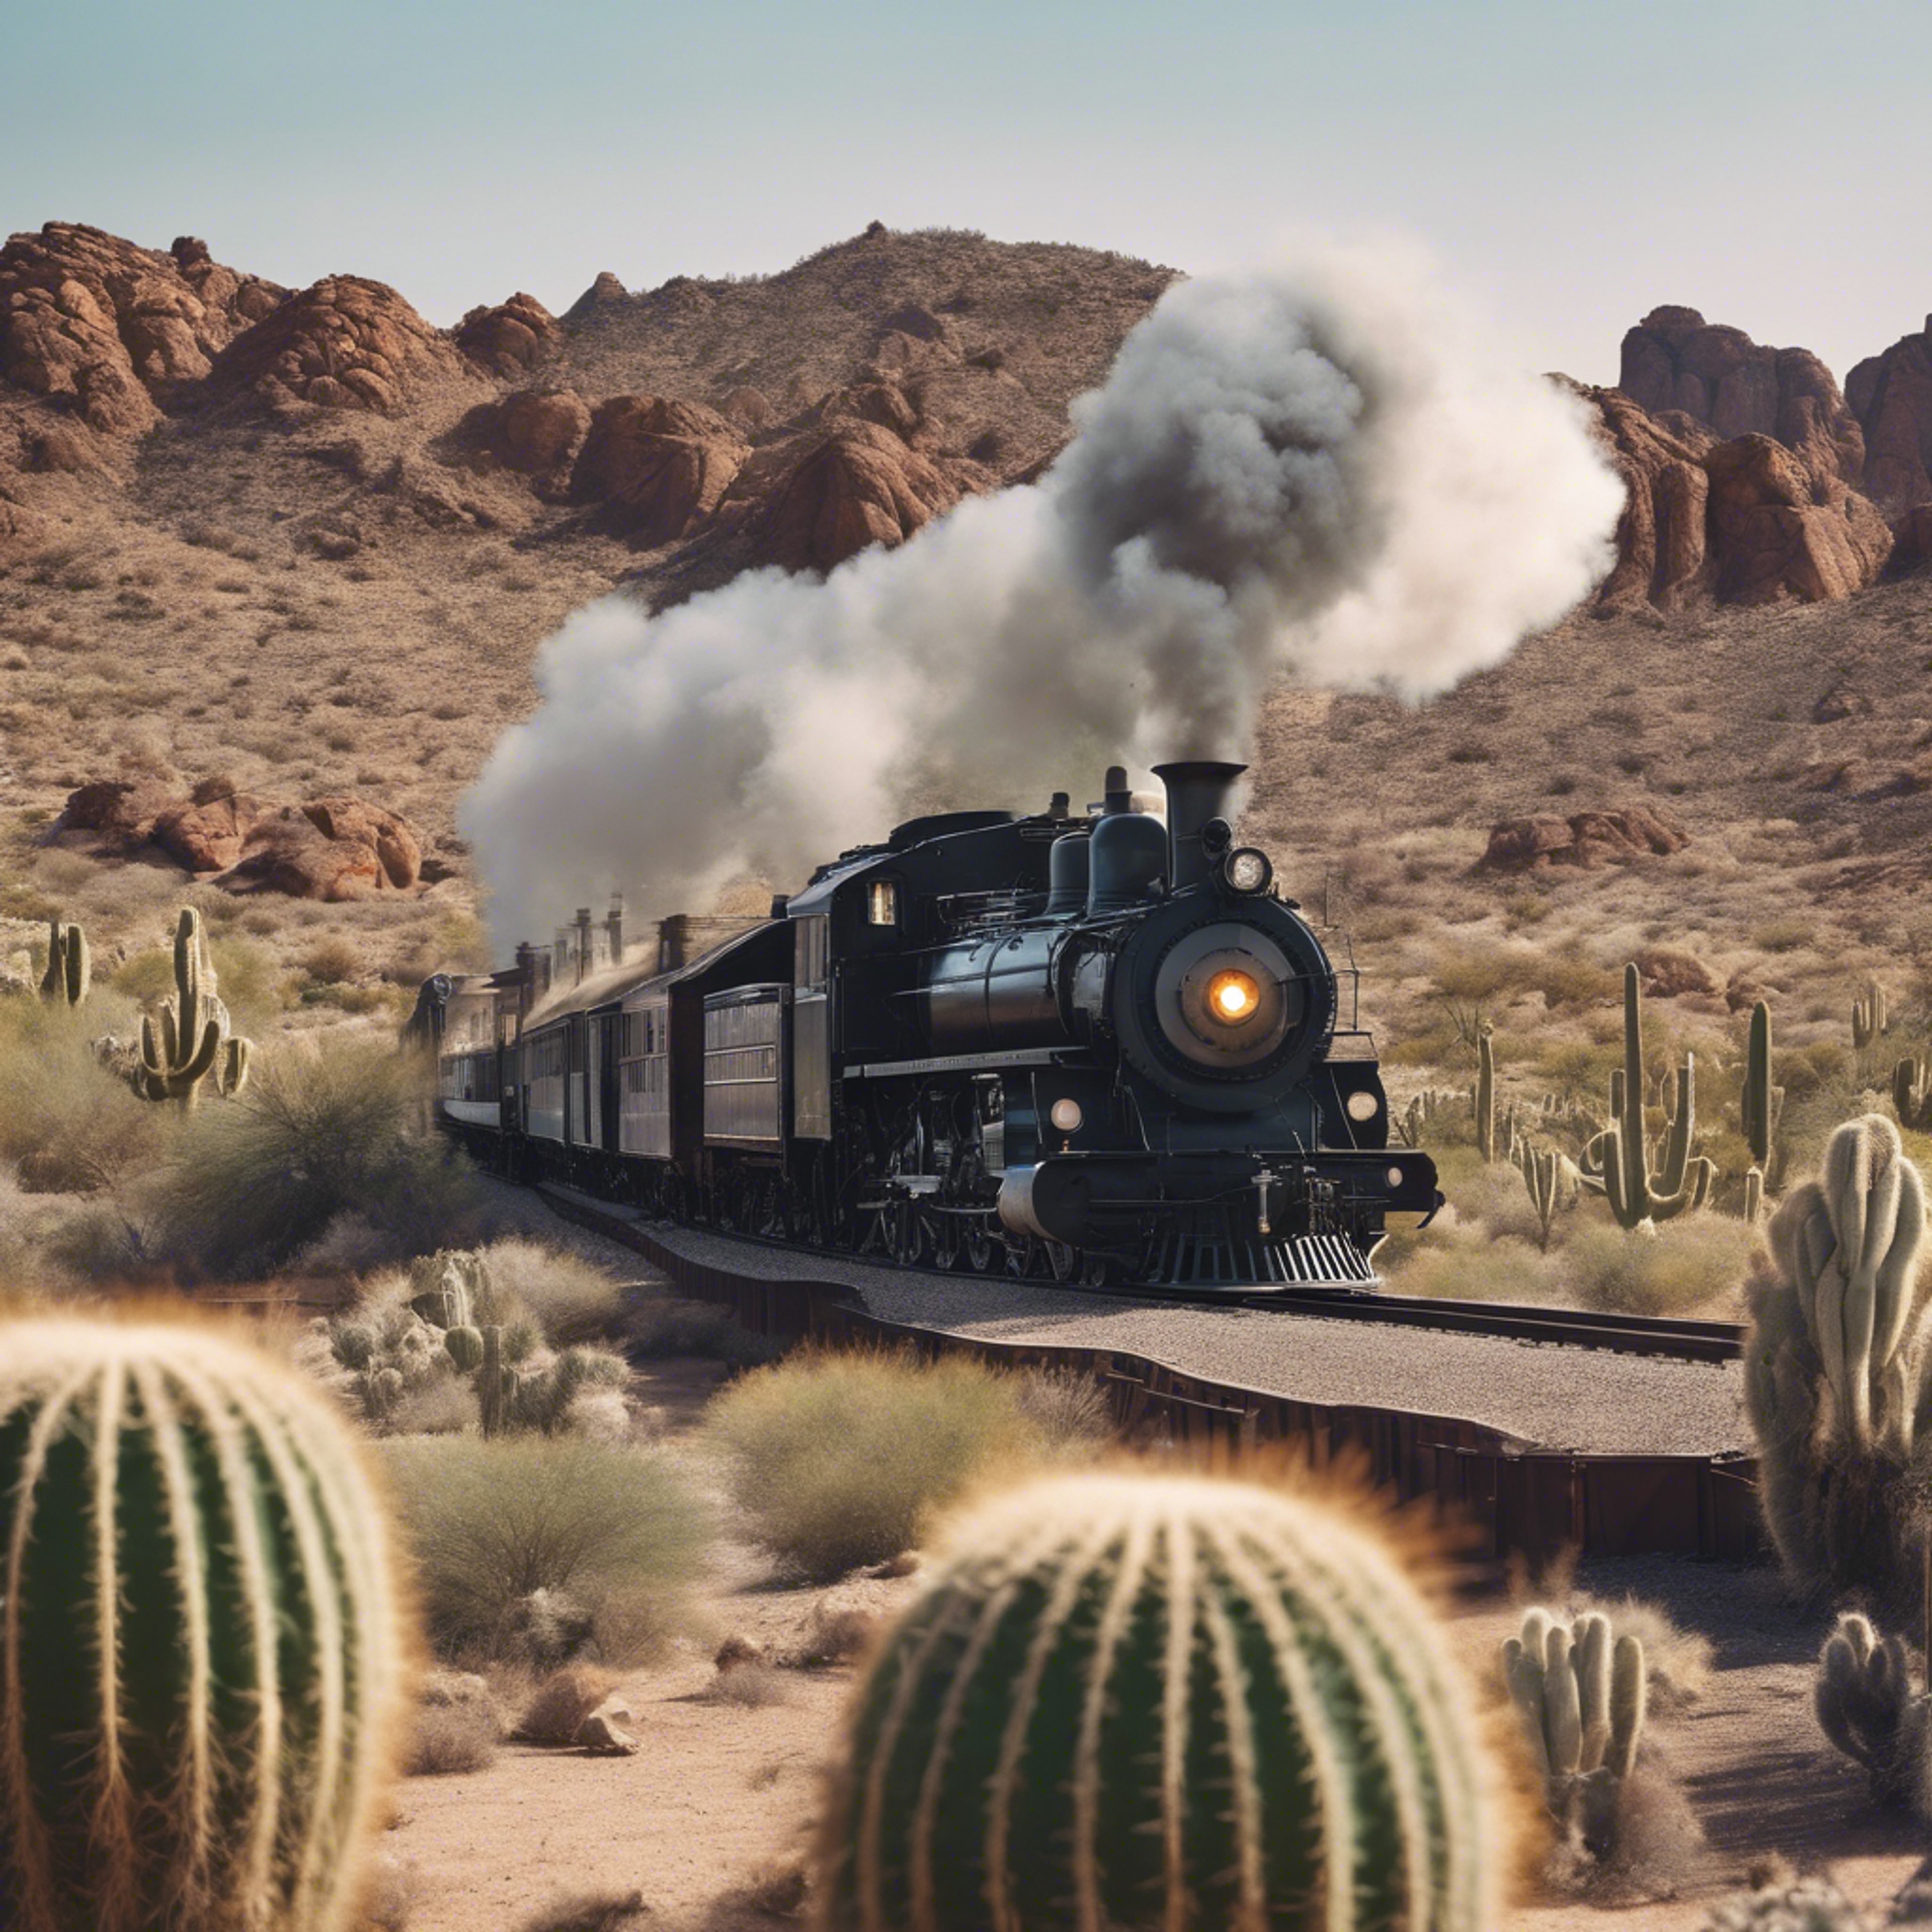 A locomotive steam train rushing across the barren Western landscape surrounded by towering cacti. 墙纸[f5a4930d44454dd795f5]